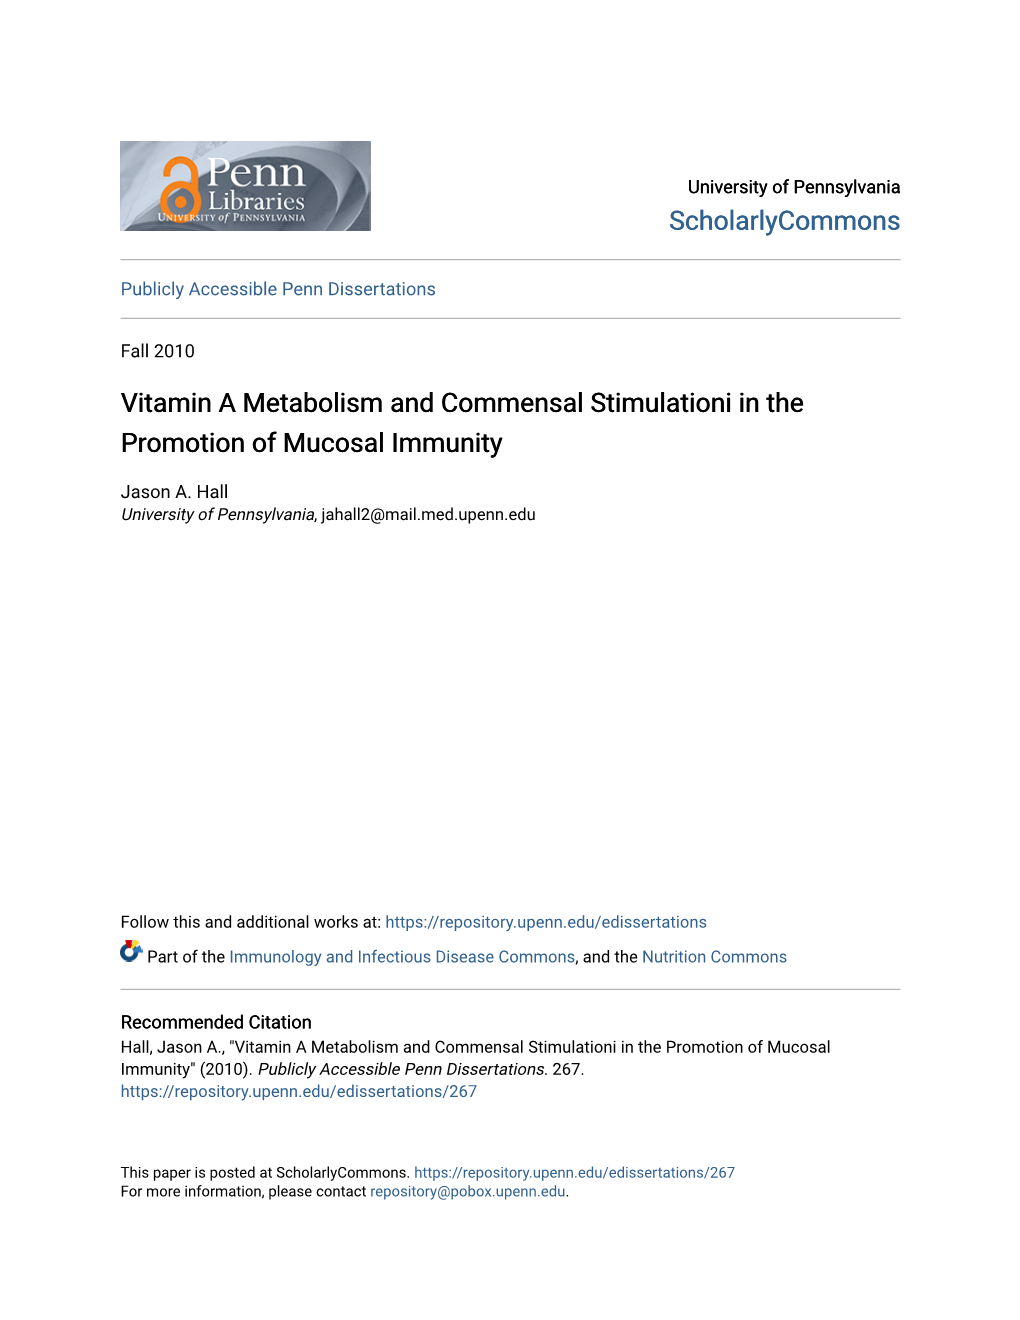 Vitamin a Metabolism and Commensal Stimulationi in the Promotion of Mucosal Immunity